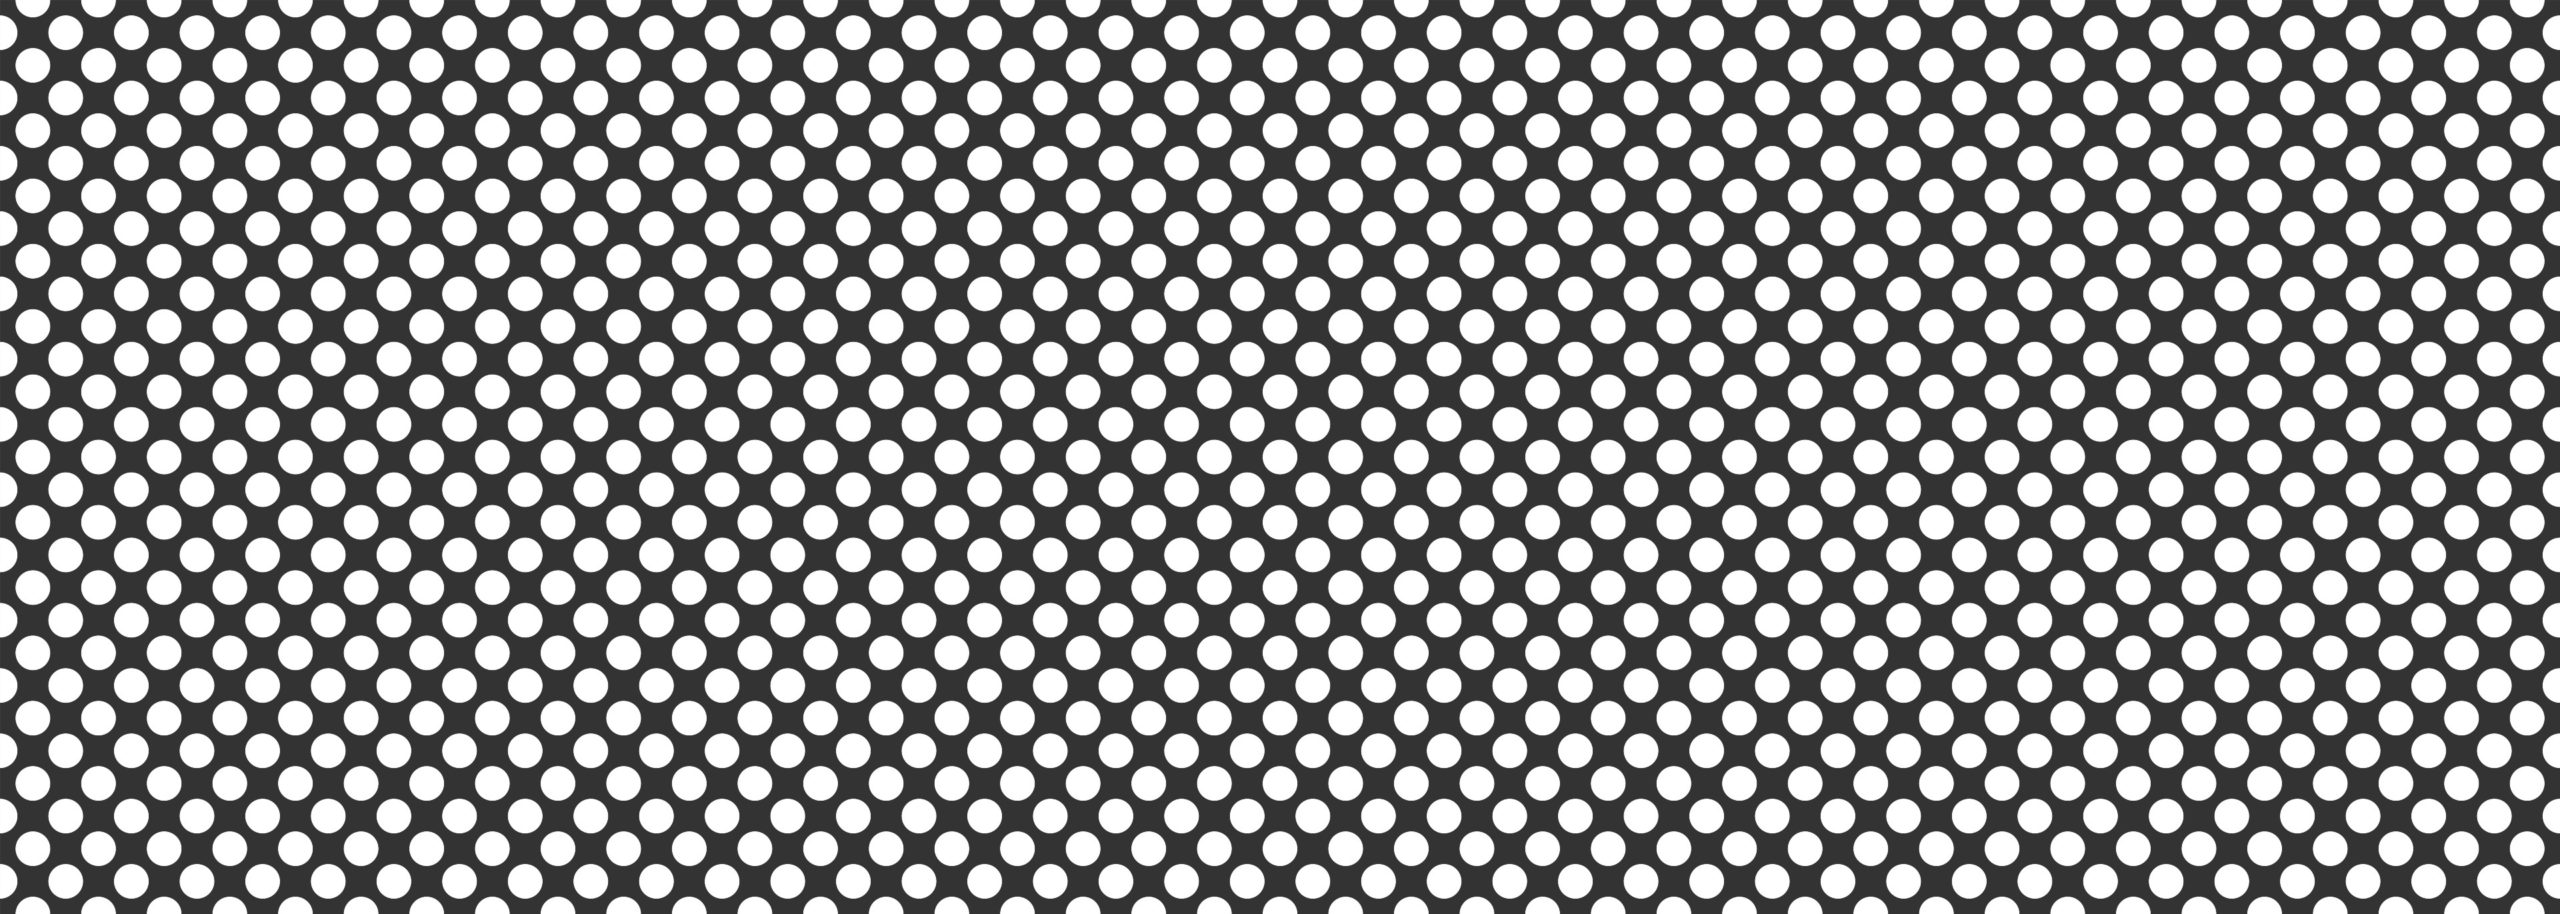 Perforated Metal Sheet, Cut-To-Size